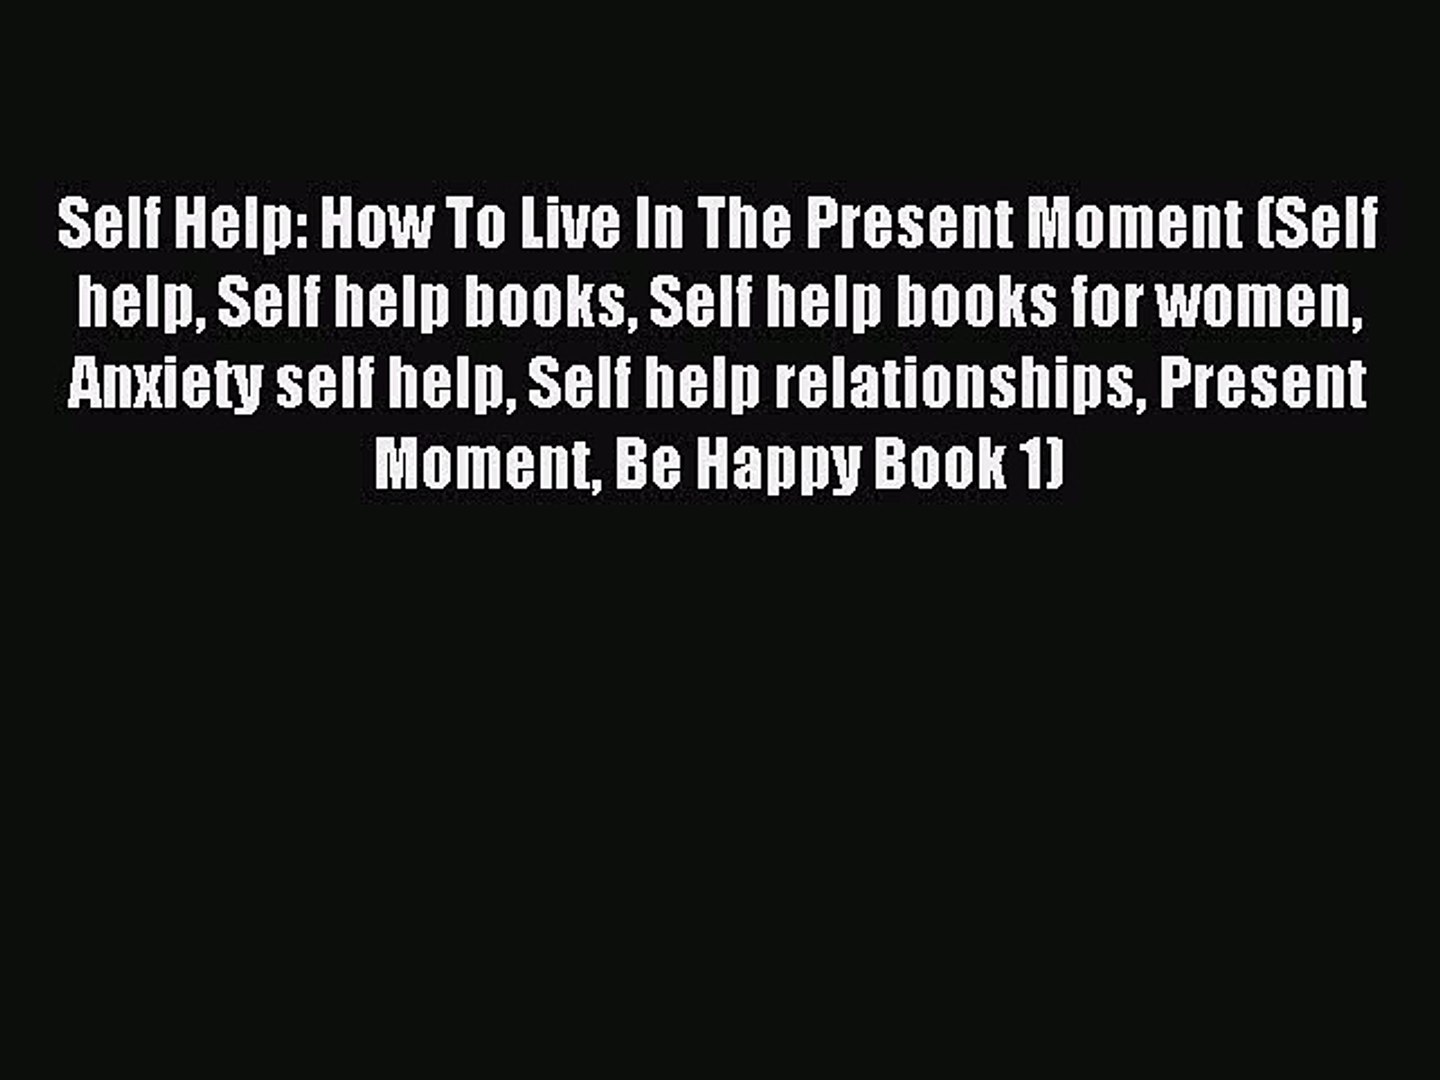 Read Self Help: How To Live In The Present Moment (Self help Self help books Self help books